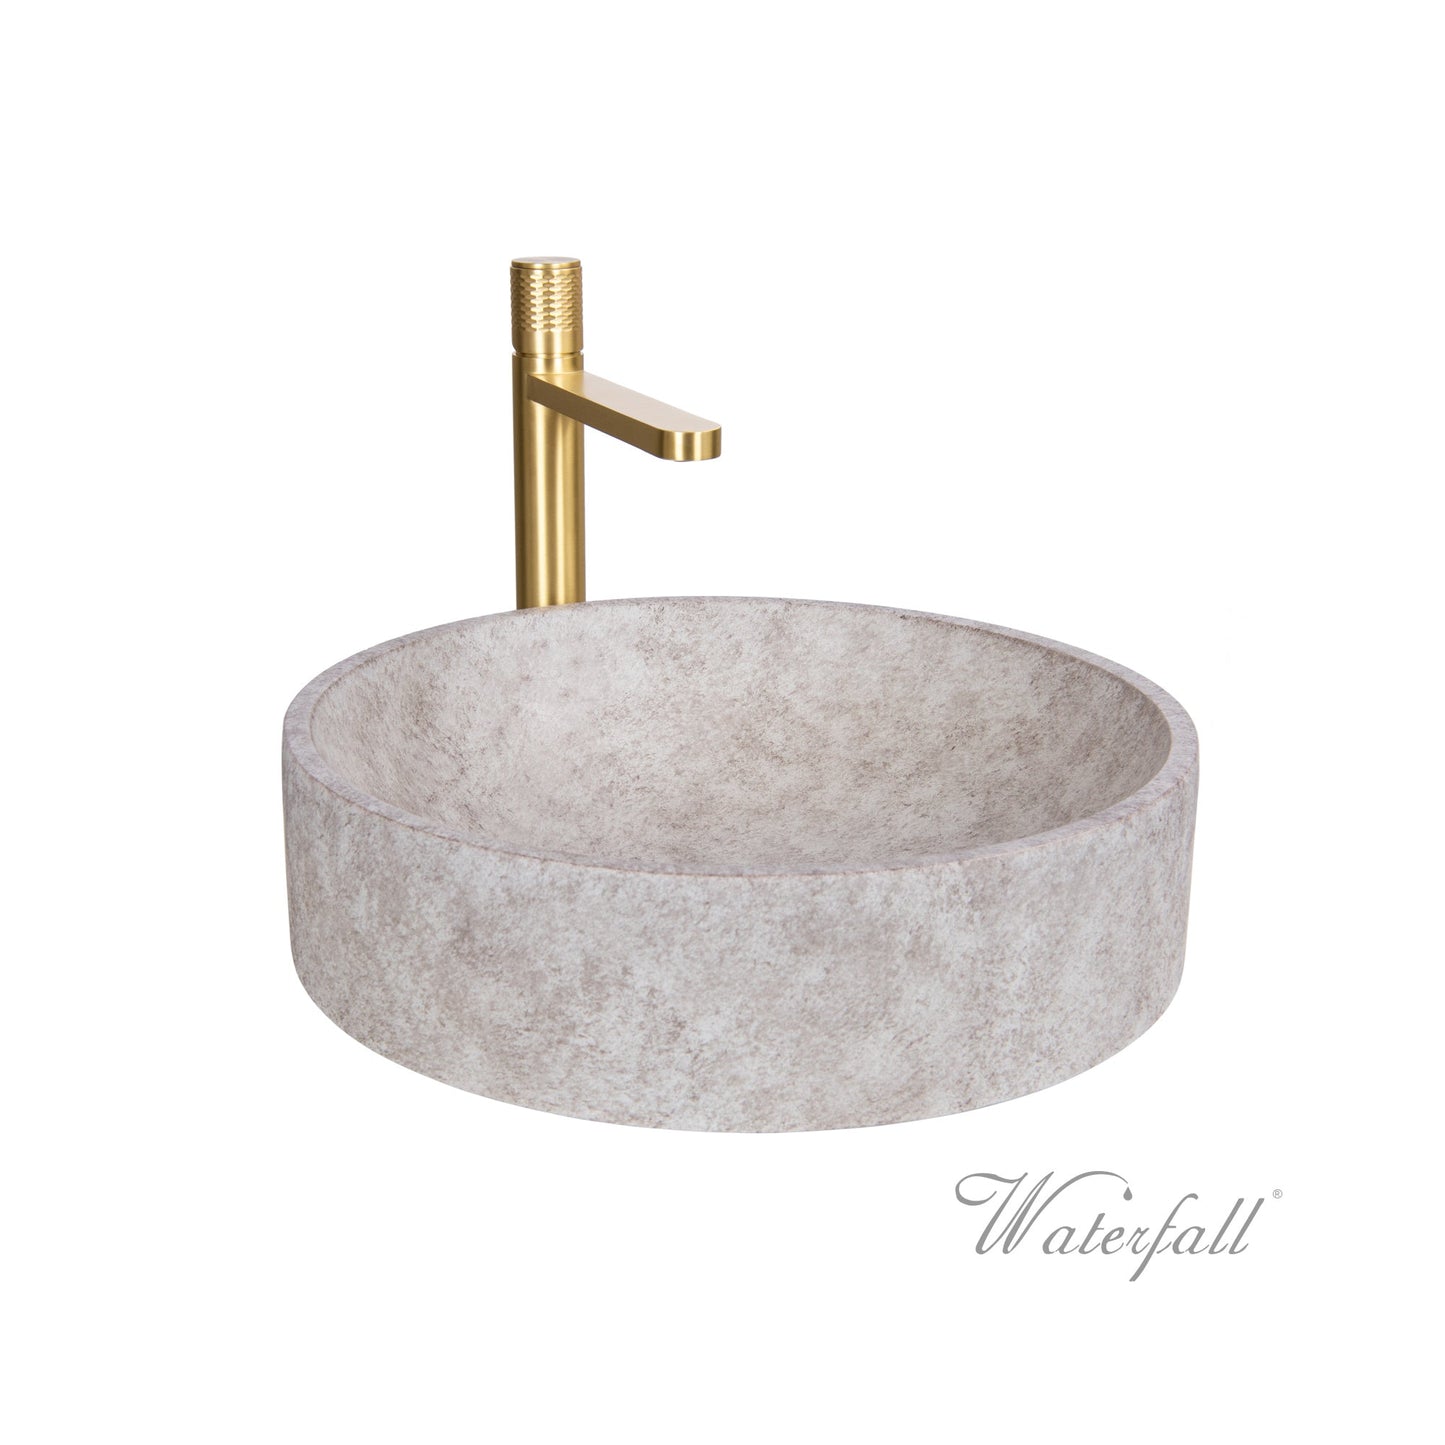 Natural Beige Skirted Concrete Sink with Satin Gold Faucet - |VESIMI Design| Luxury and Rustic bathrooms online